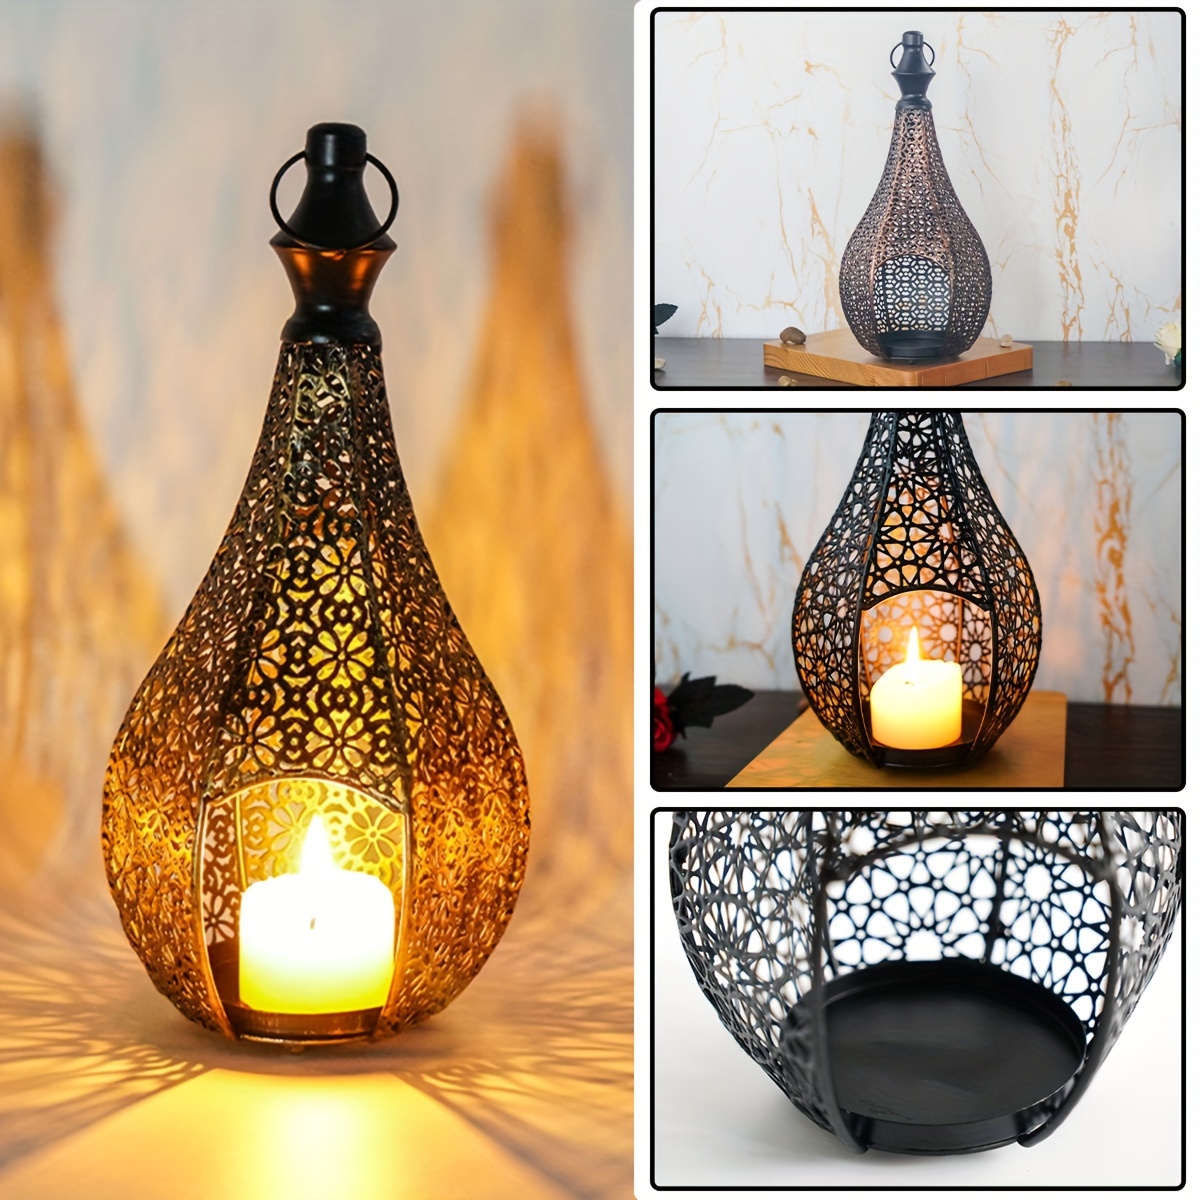 

1pc Moroccan-inspired Metal Lantern Candle Holder, Decorative Ornamental Stand For Room And Bedroom Ambience, Metal Craft Centerpiece (candle Not Included)